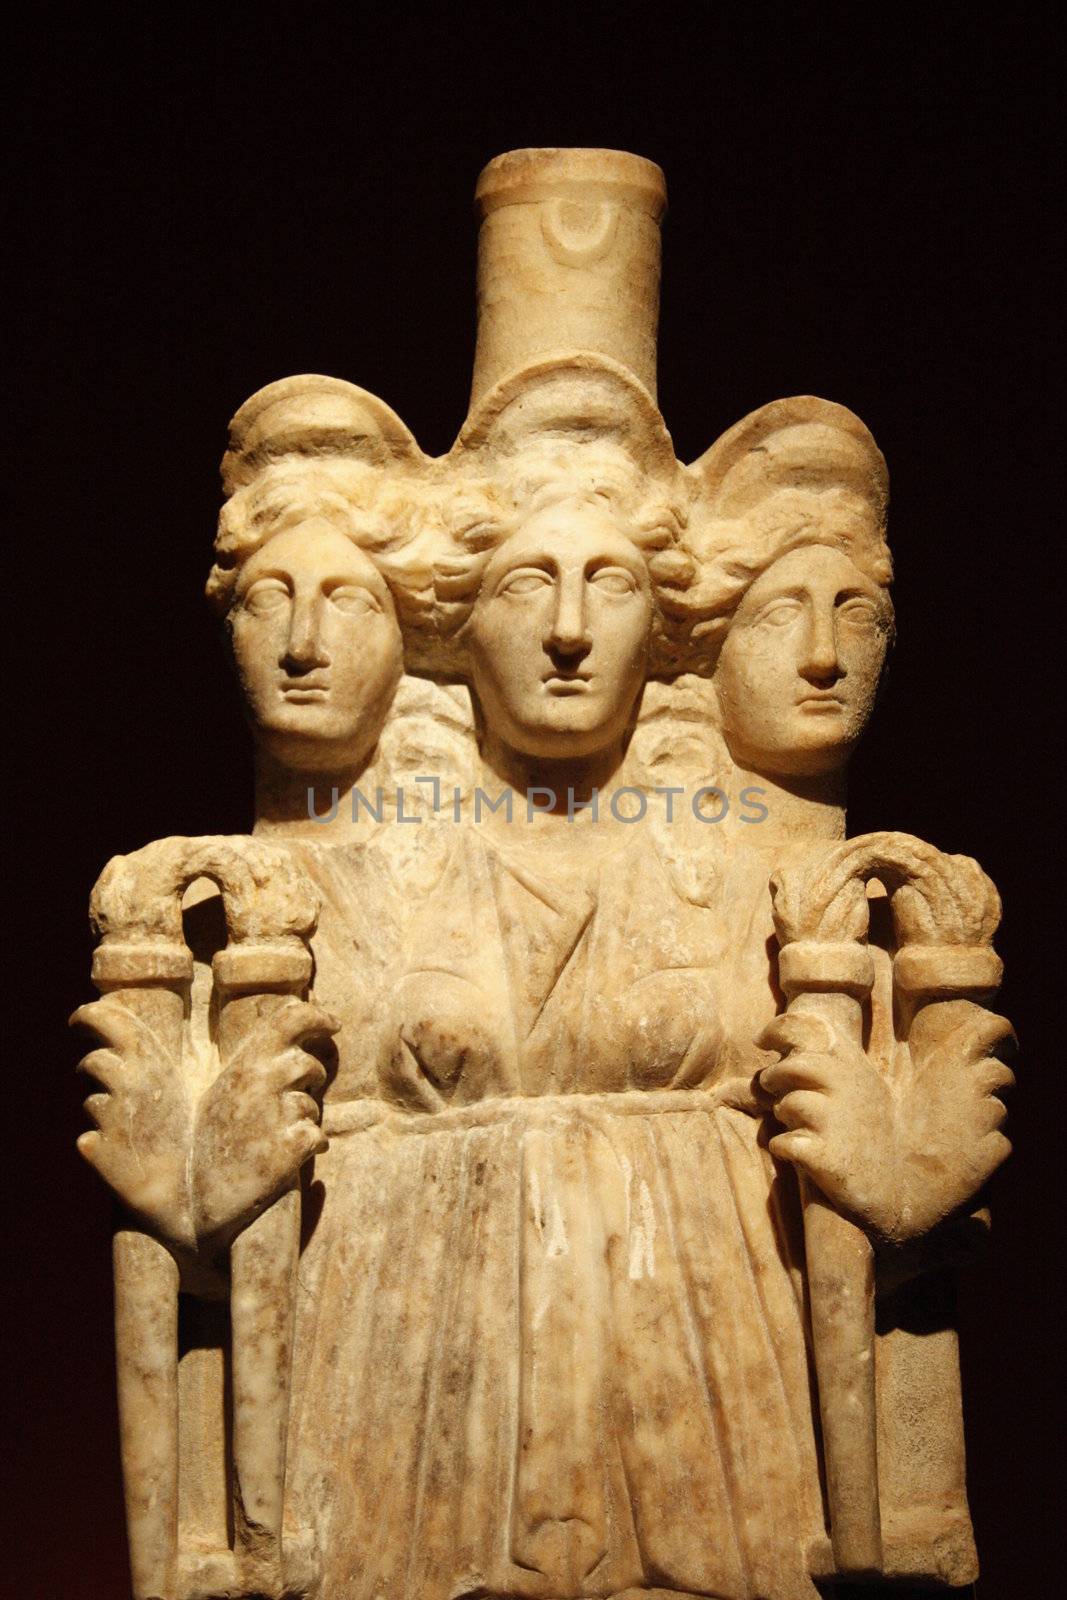 Hecate goddess marble antique sculpture in Archaeological Museum of Antalya, Turkey